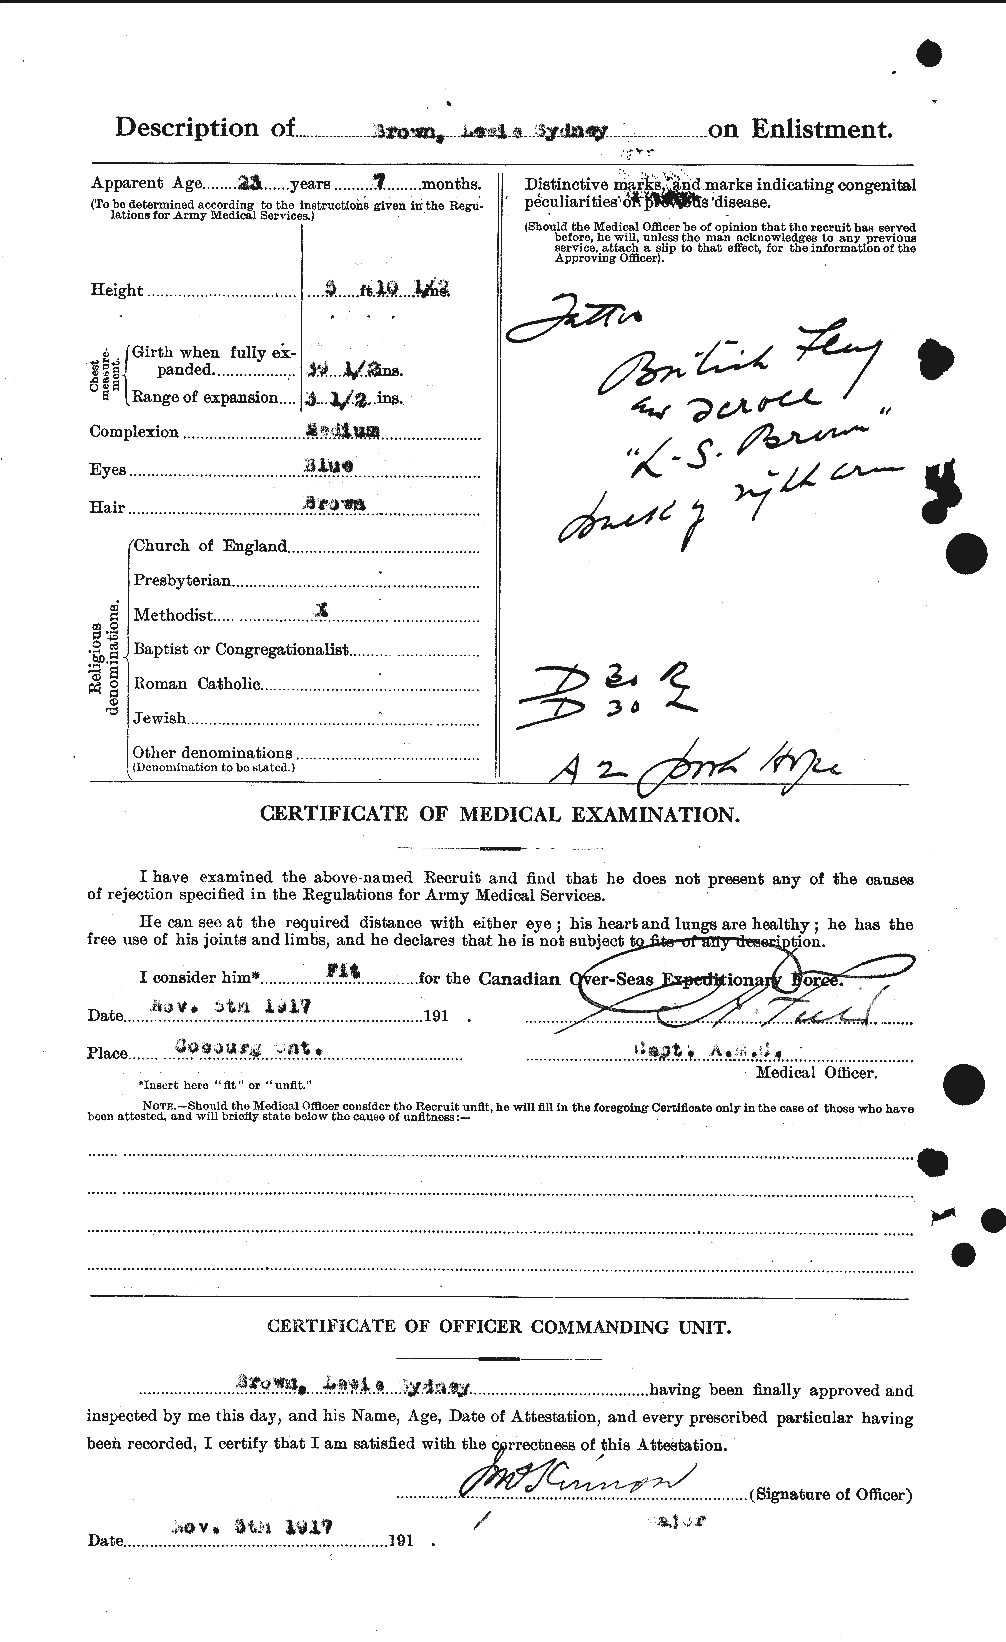 Personnel Records of the First World War - CEF 266319b